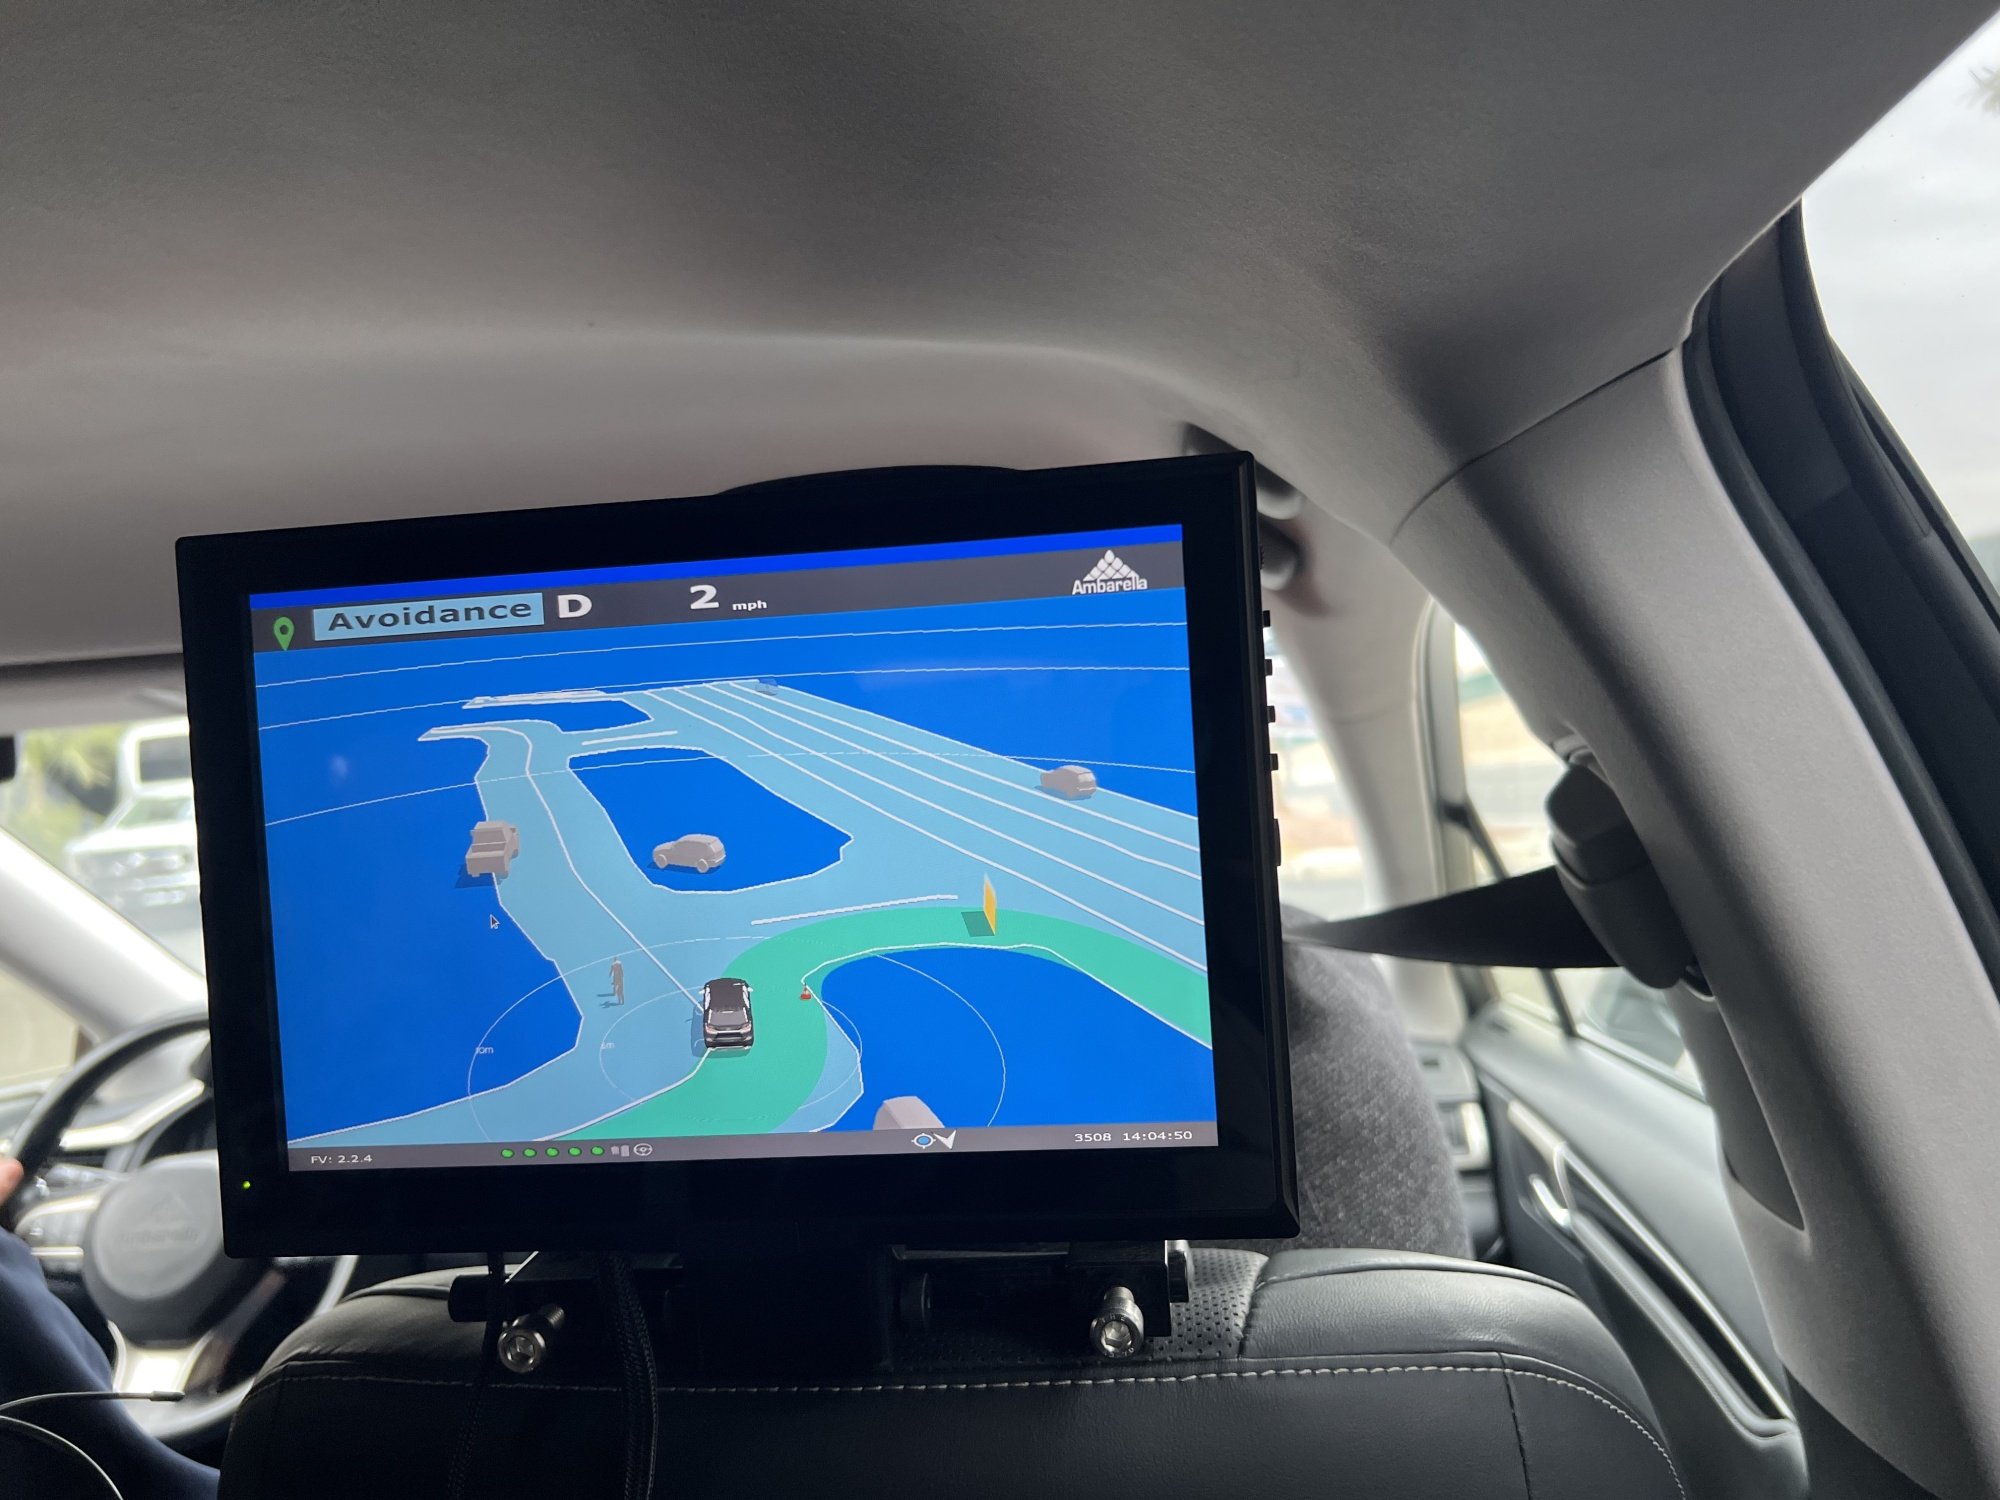 A tv screen attached to the passenger side headrest